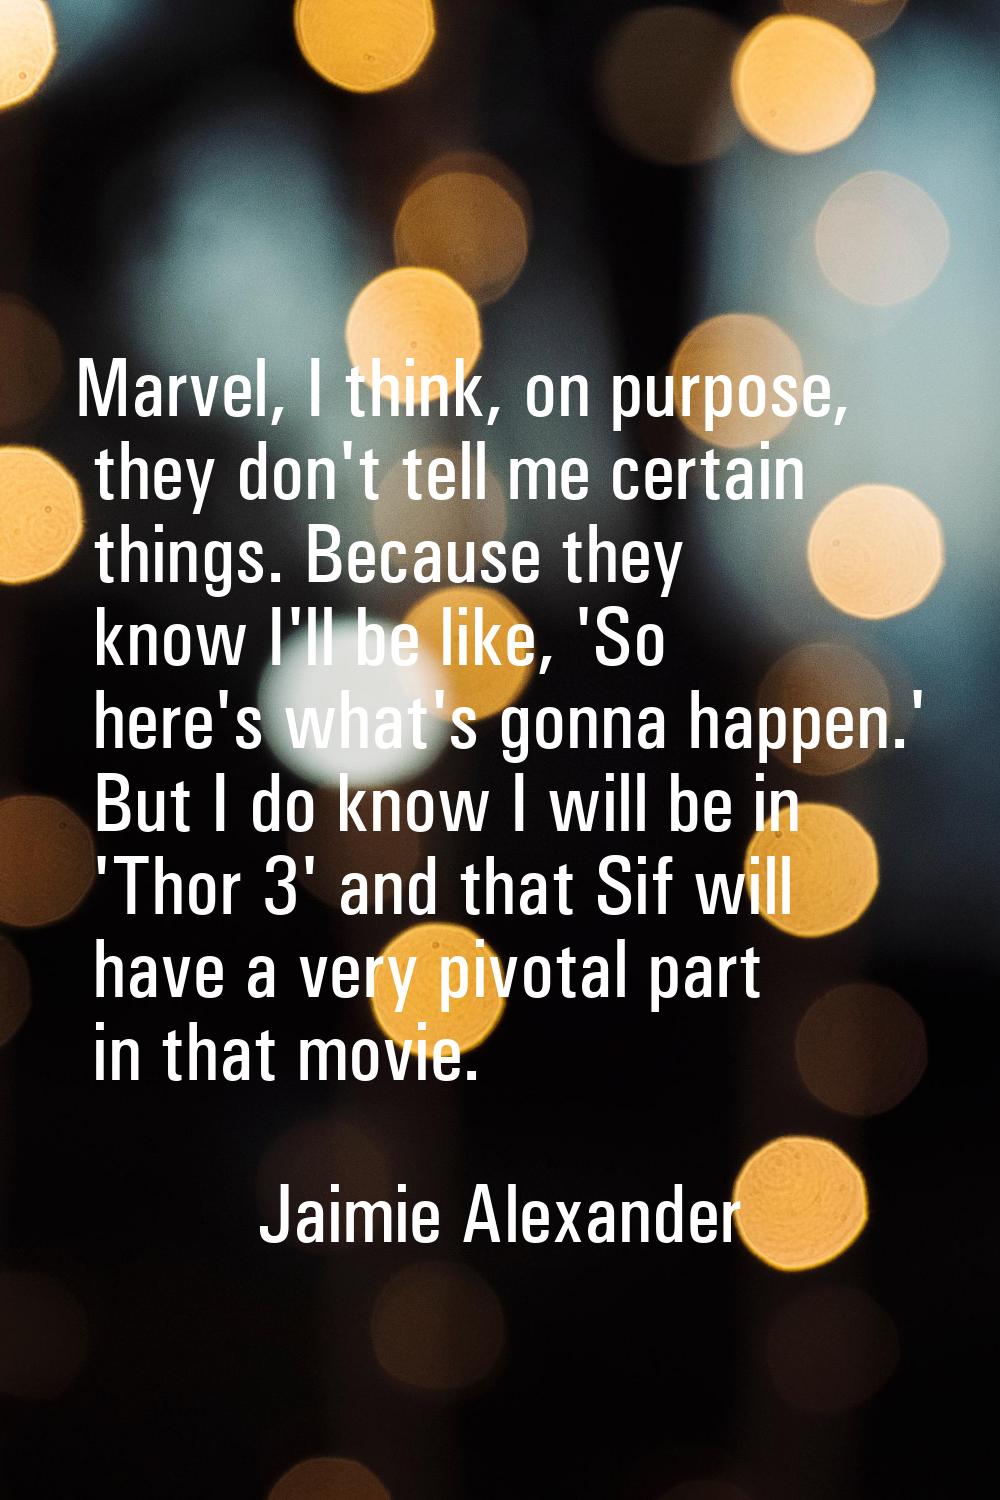 Marvel, I think, on purpose, they don't tell me certain things. Because they know I'll be like, 'So